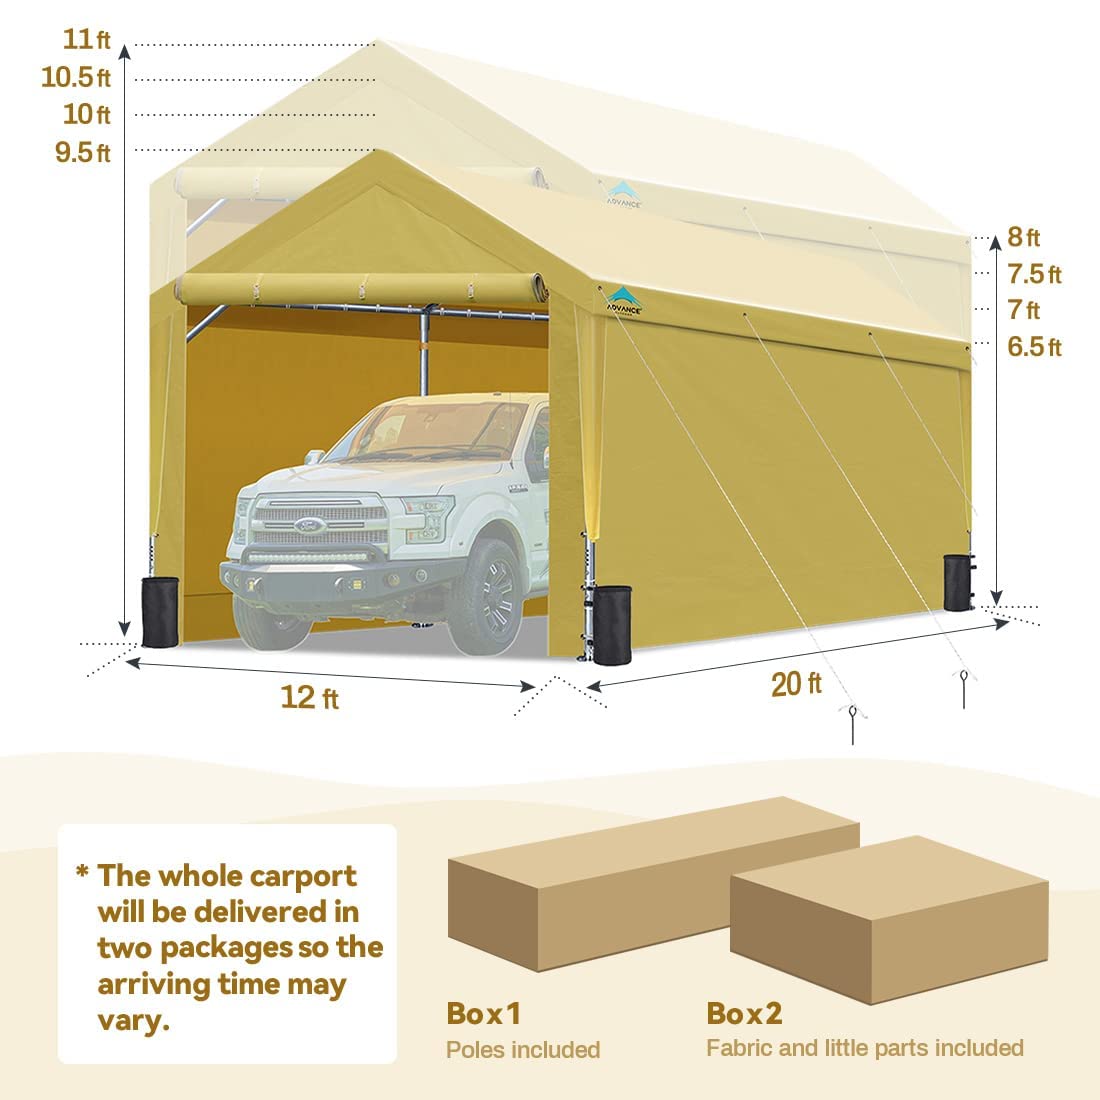 ADVANCE OUTDOOR 12x20 ft Heavy Duty Carport with Sidewalls & Doors, Adjustable Height from 9.5 ft to 11 ft, Car Canopy Garage Party Tent Boat Shelter with 8 Reinforced Poles and 4 Sandbags, Beige 12'x20'